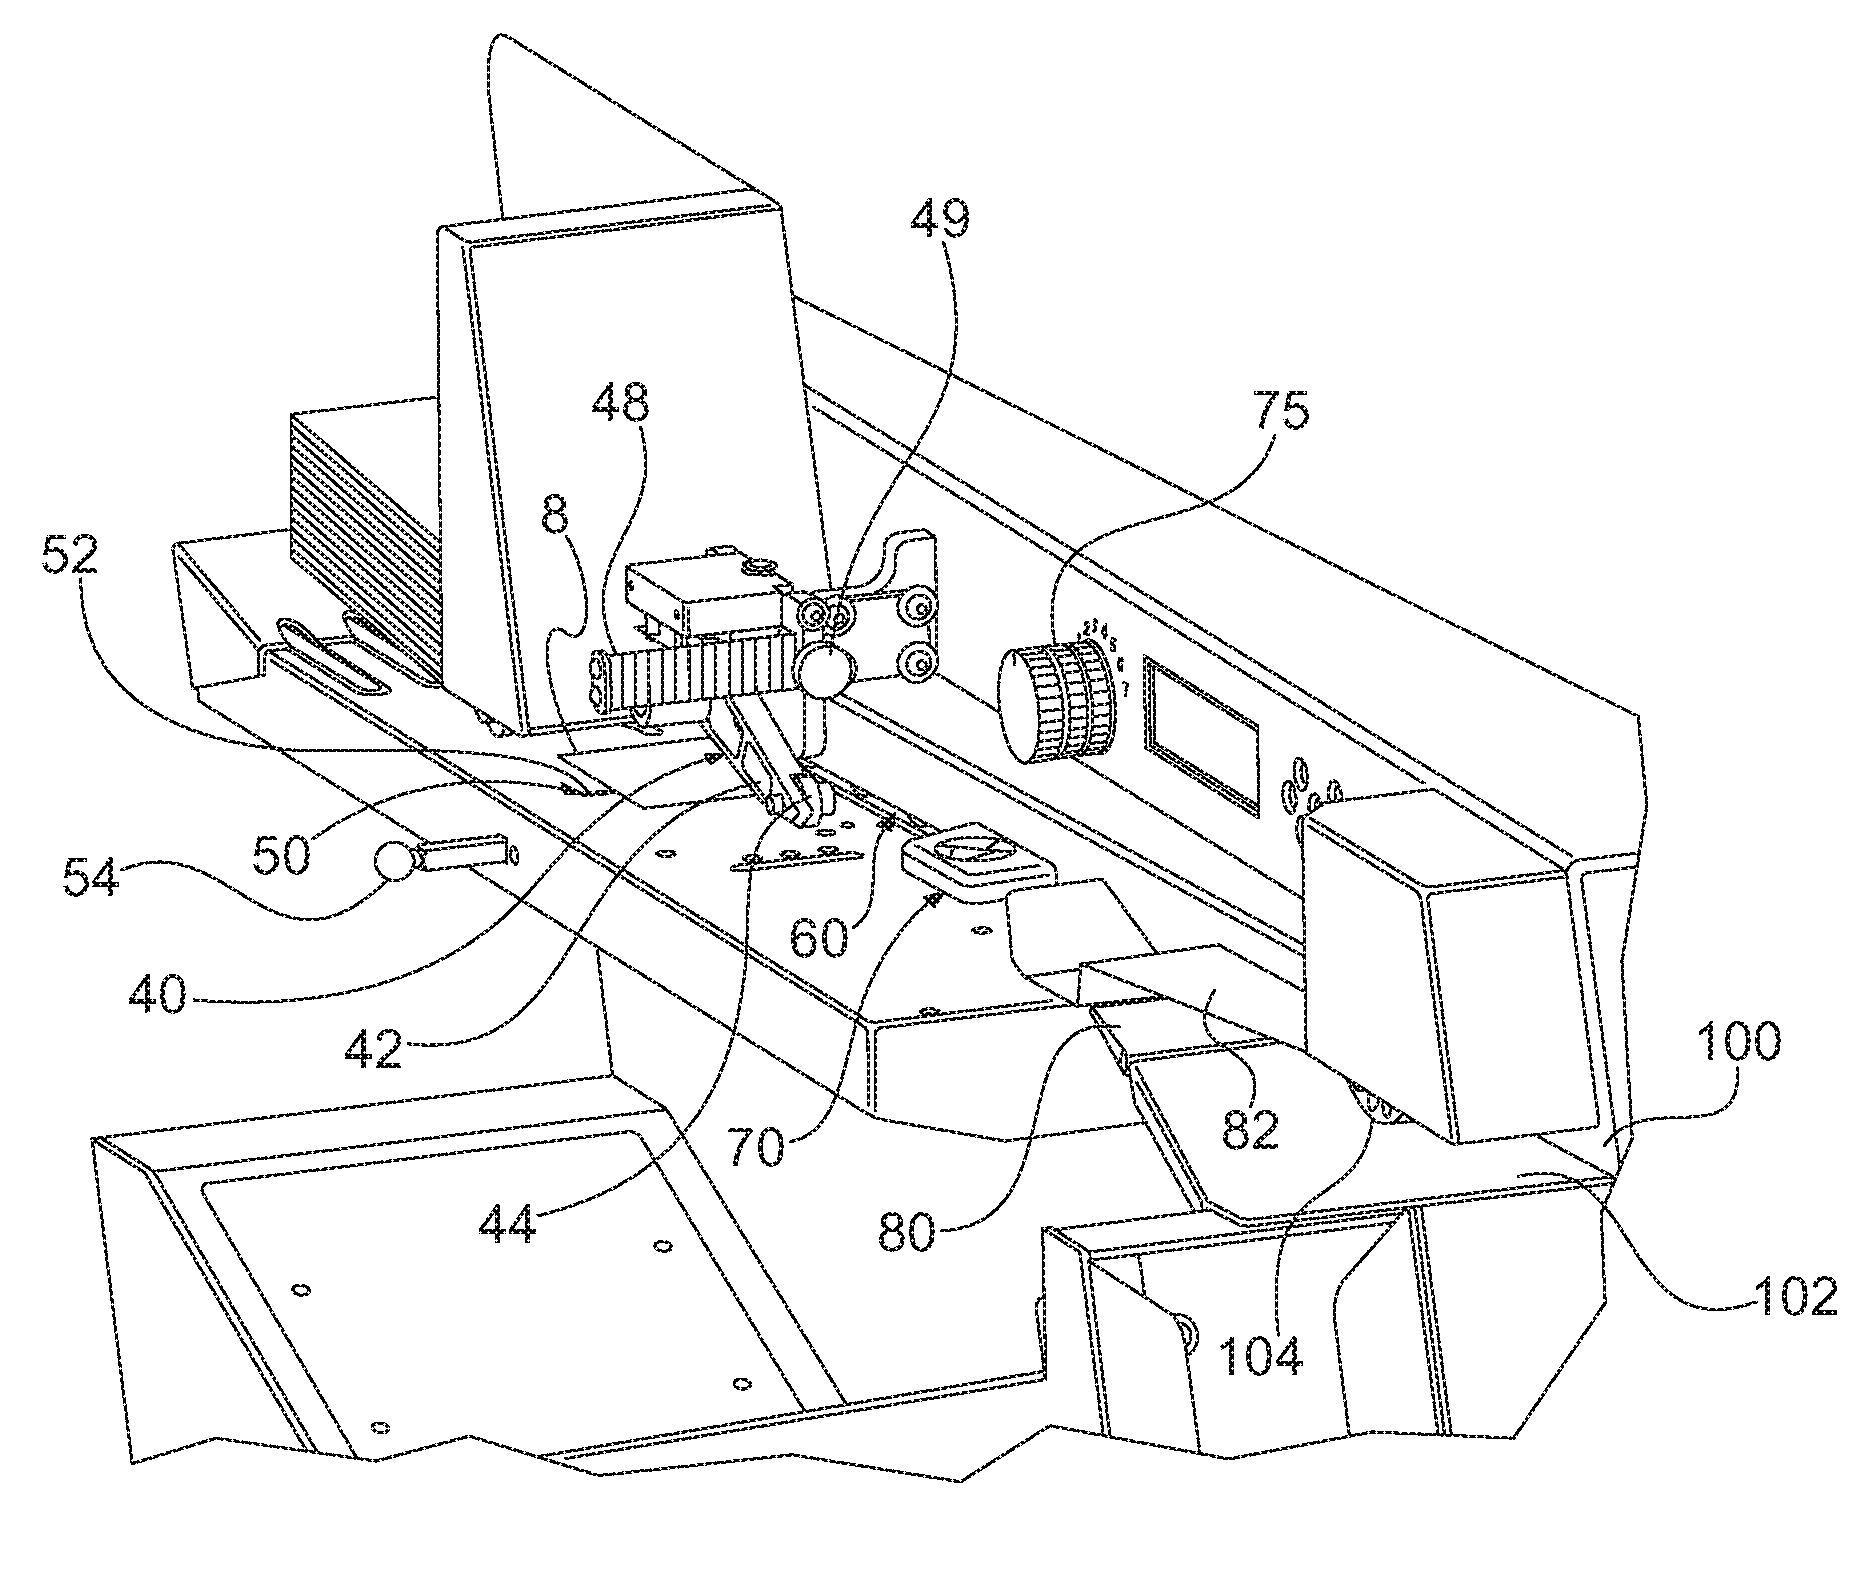 Apparatus for opening and sorting envelopes